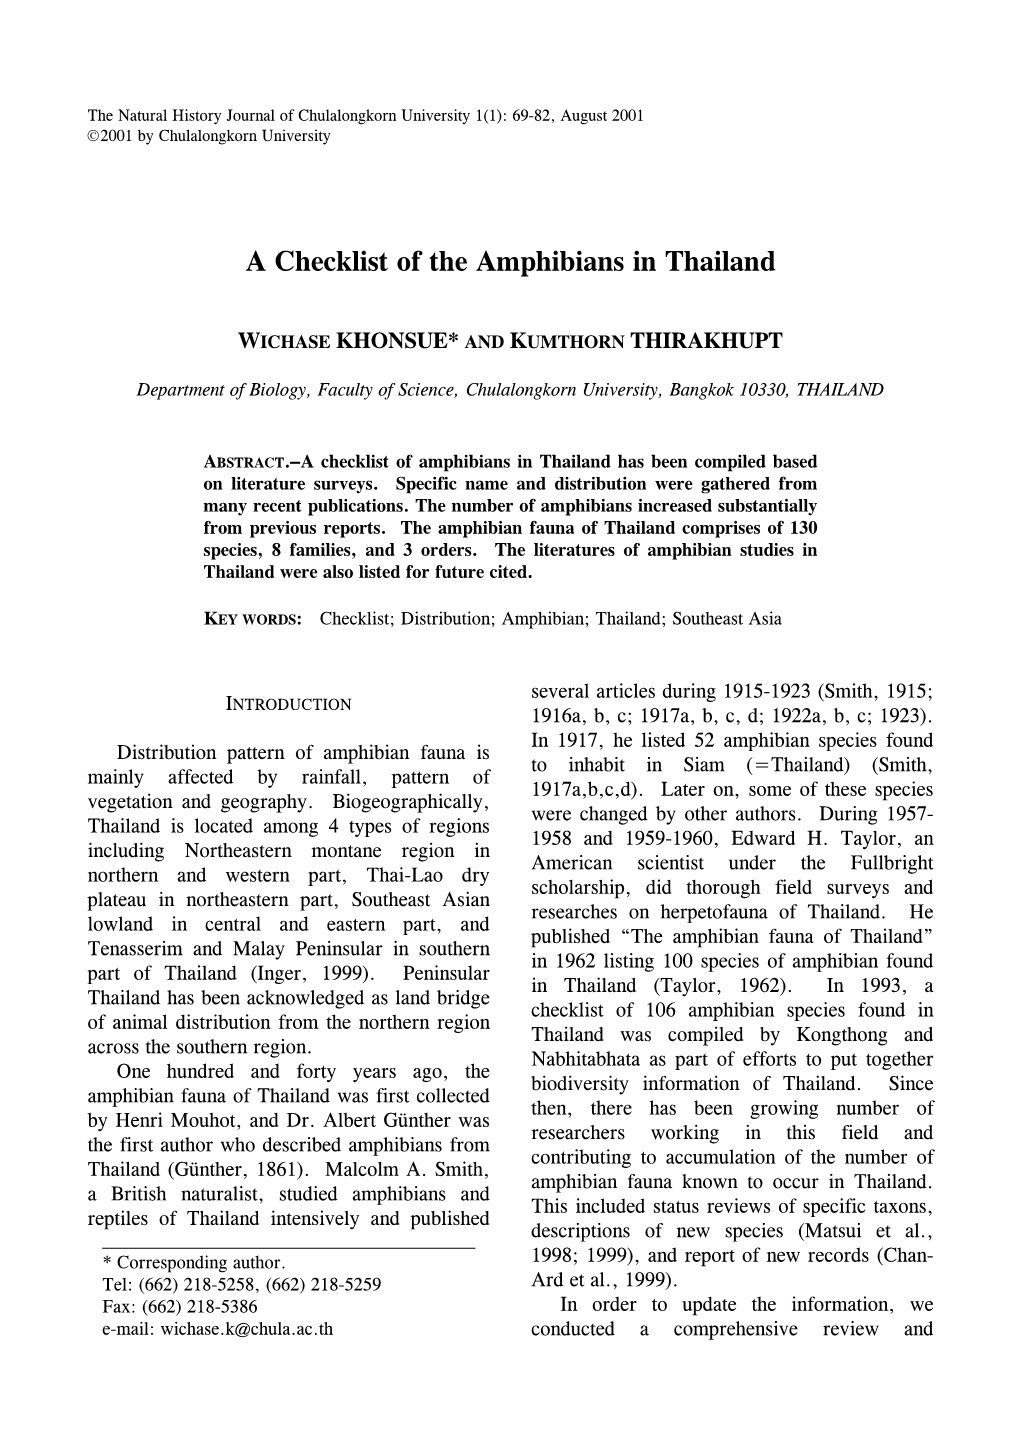 A Checklist of the Amphibians in Thailand